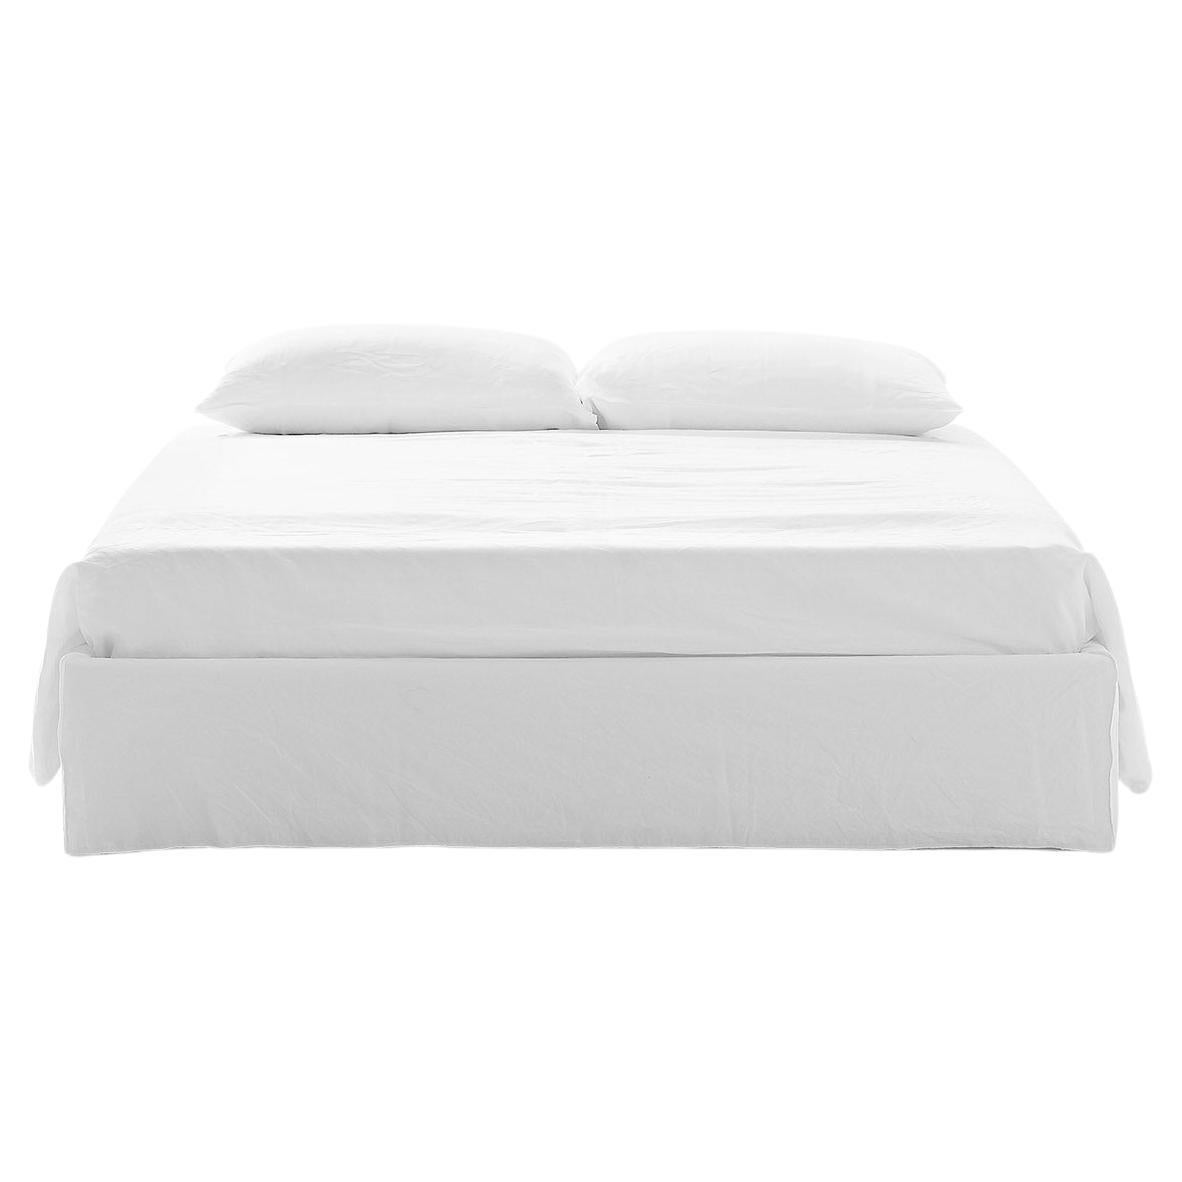 Gervasoni Ghost 80 XL Bed in White Linen Upholstery by Paola Navone